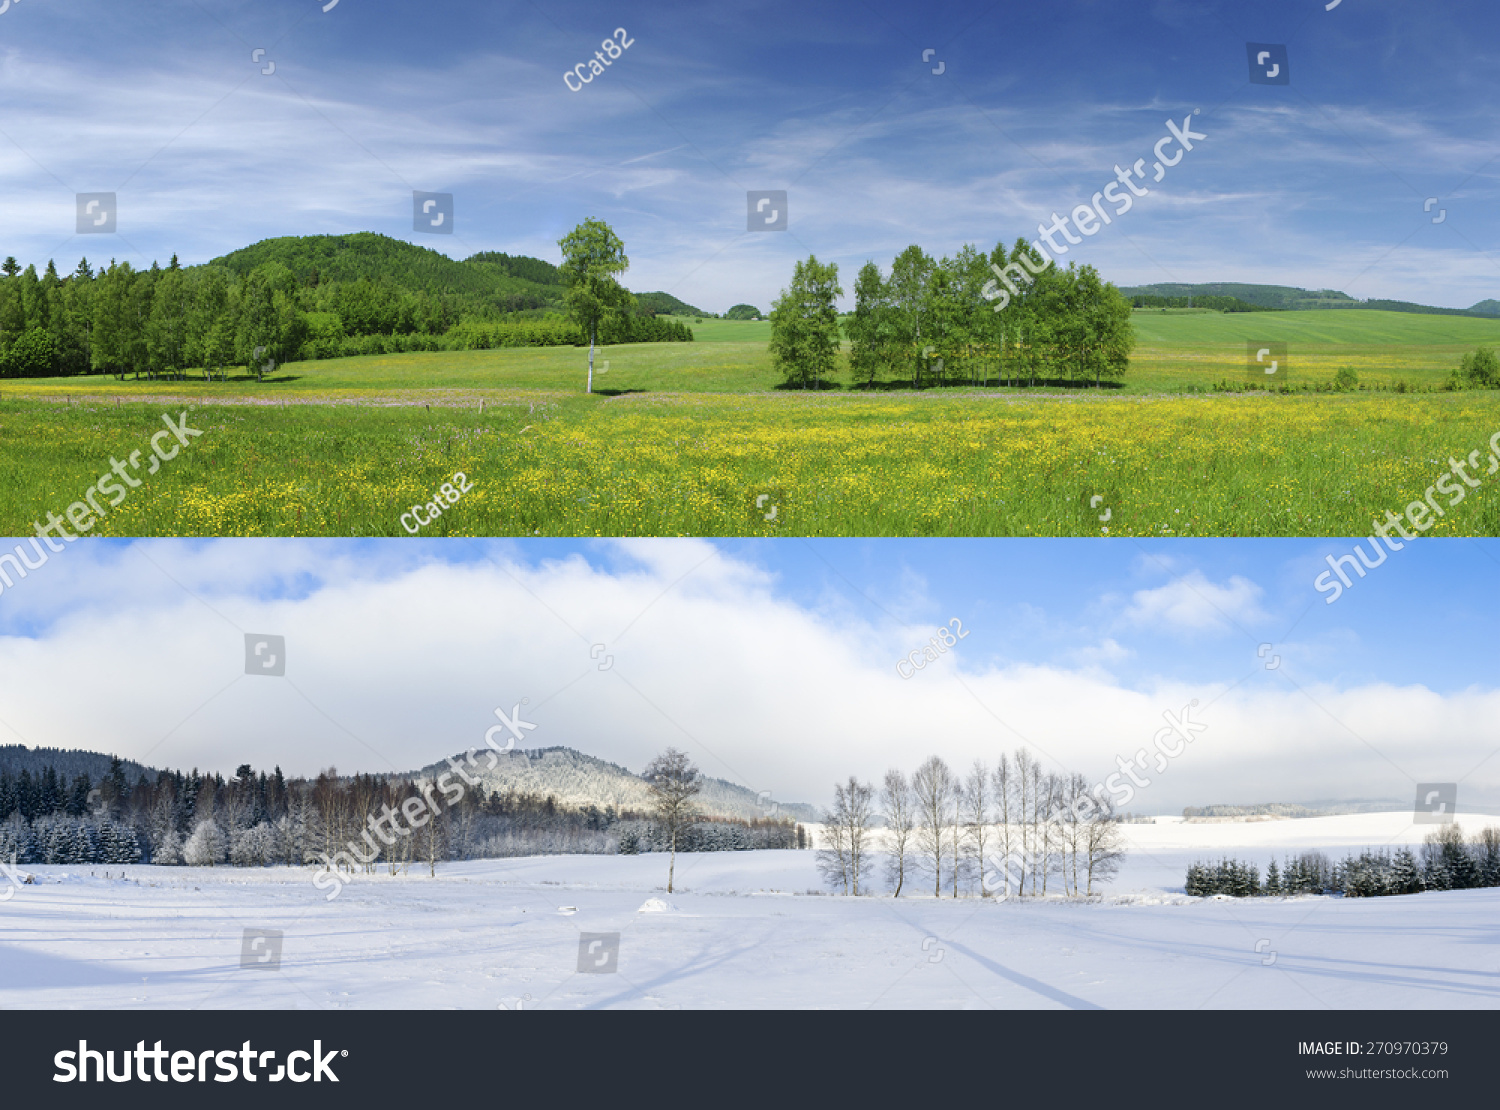 Comparison of 2 seasons - winter and summer #270970379